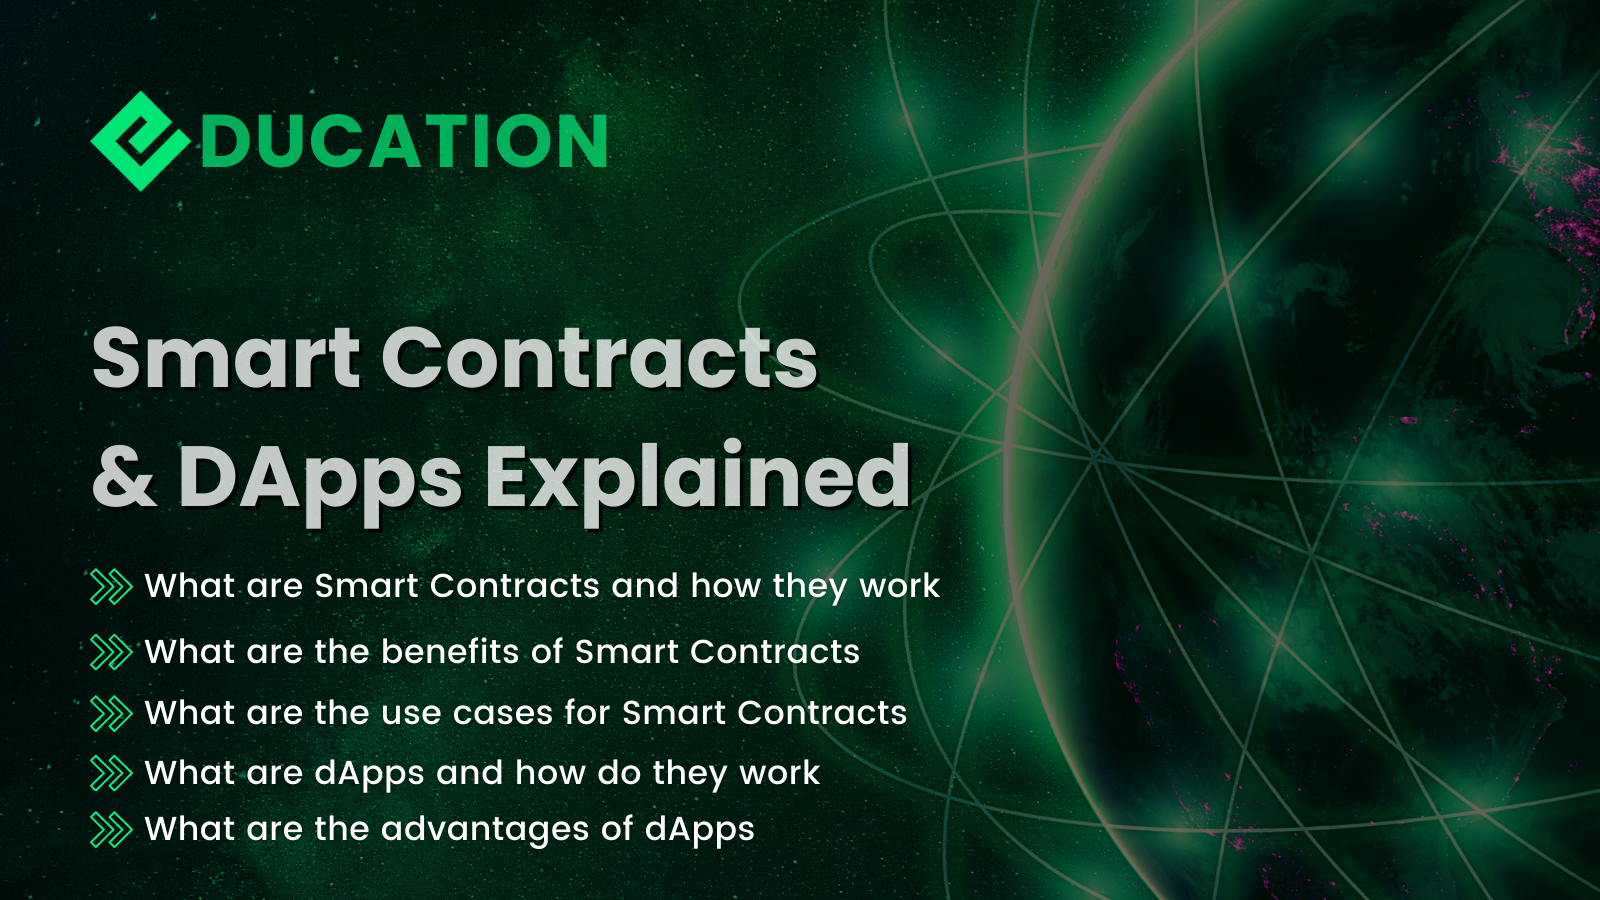 Cover image presenting how smart contracts & dapps work